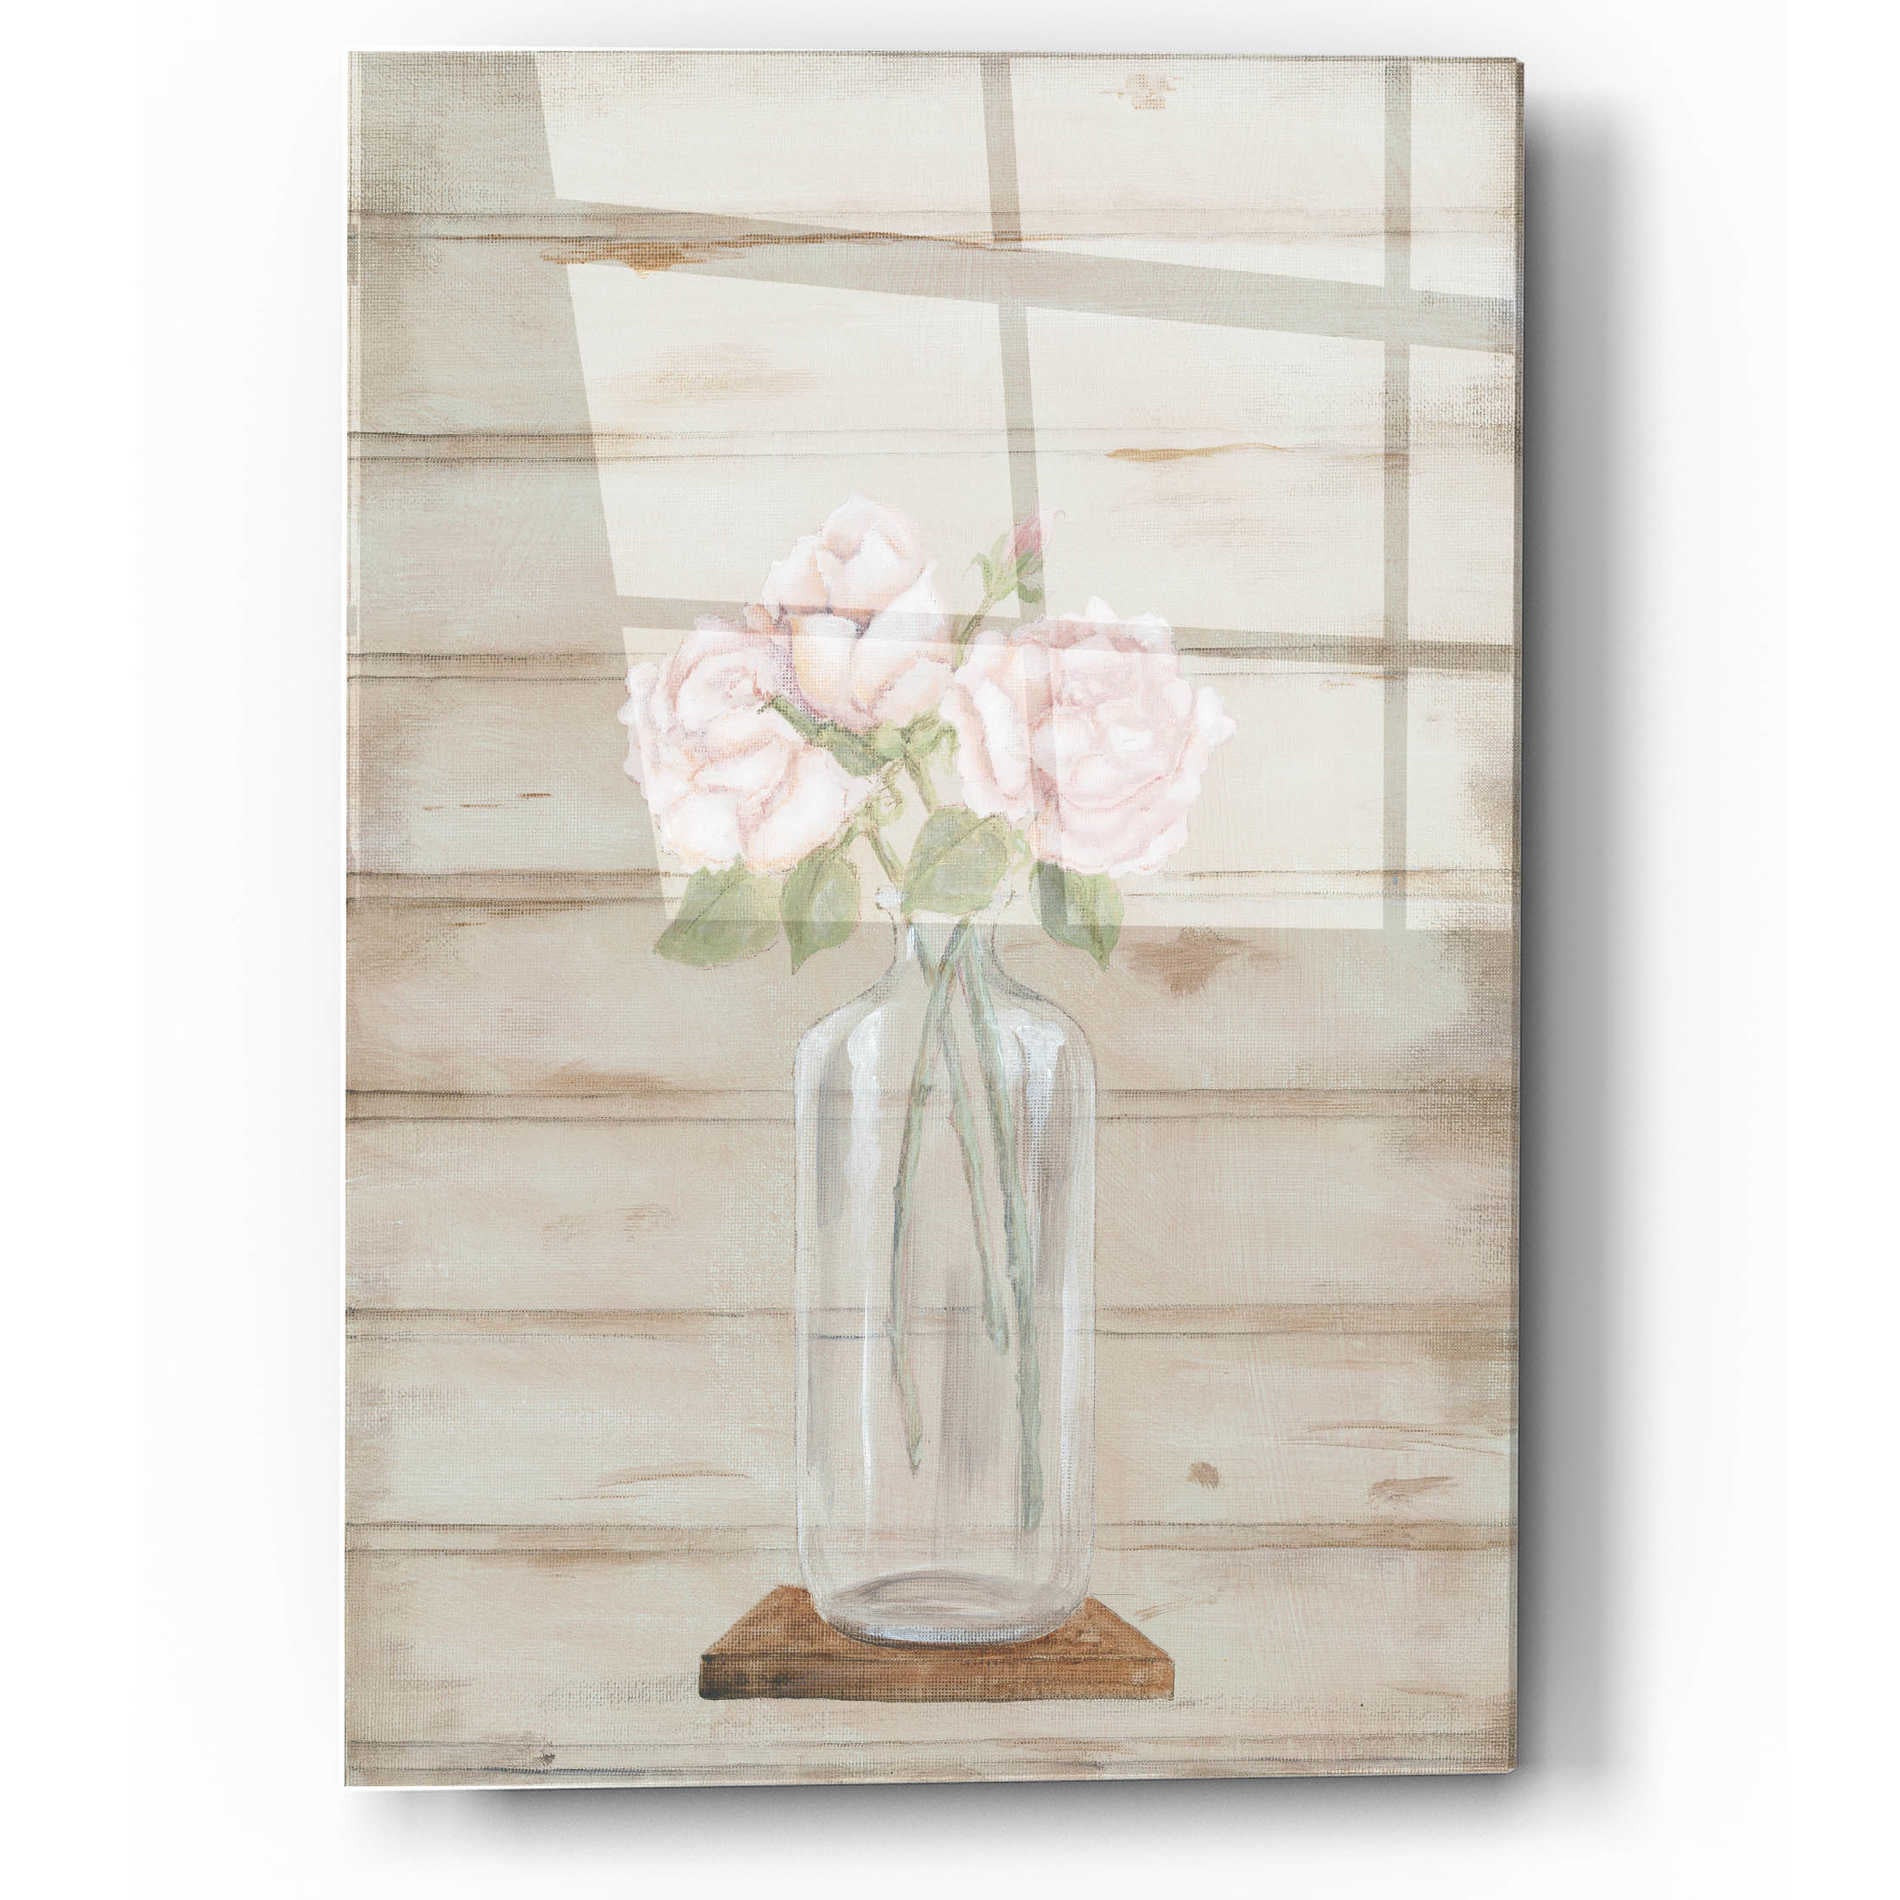 Epic Art 'Roses in Glass Vase' by Pam Britton, Acrylic Glass Wall Art,12x16